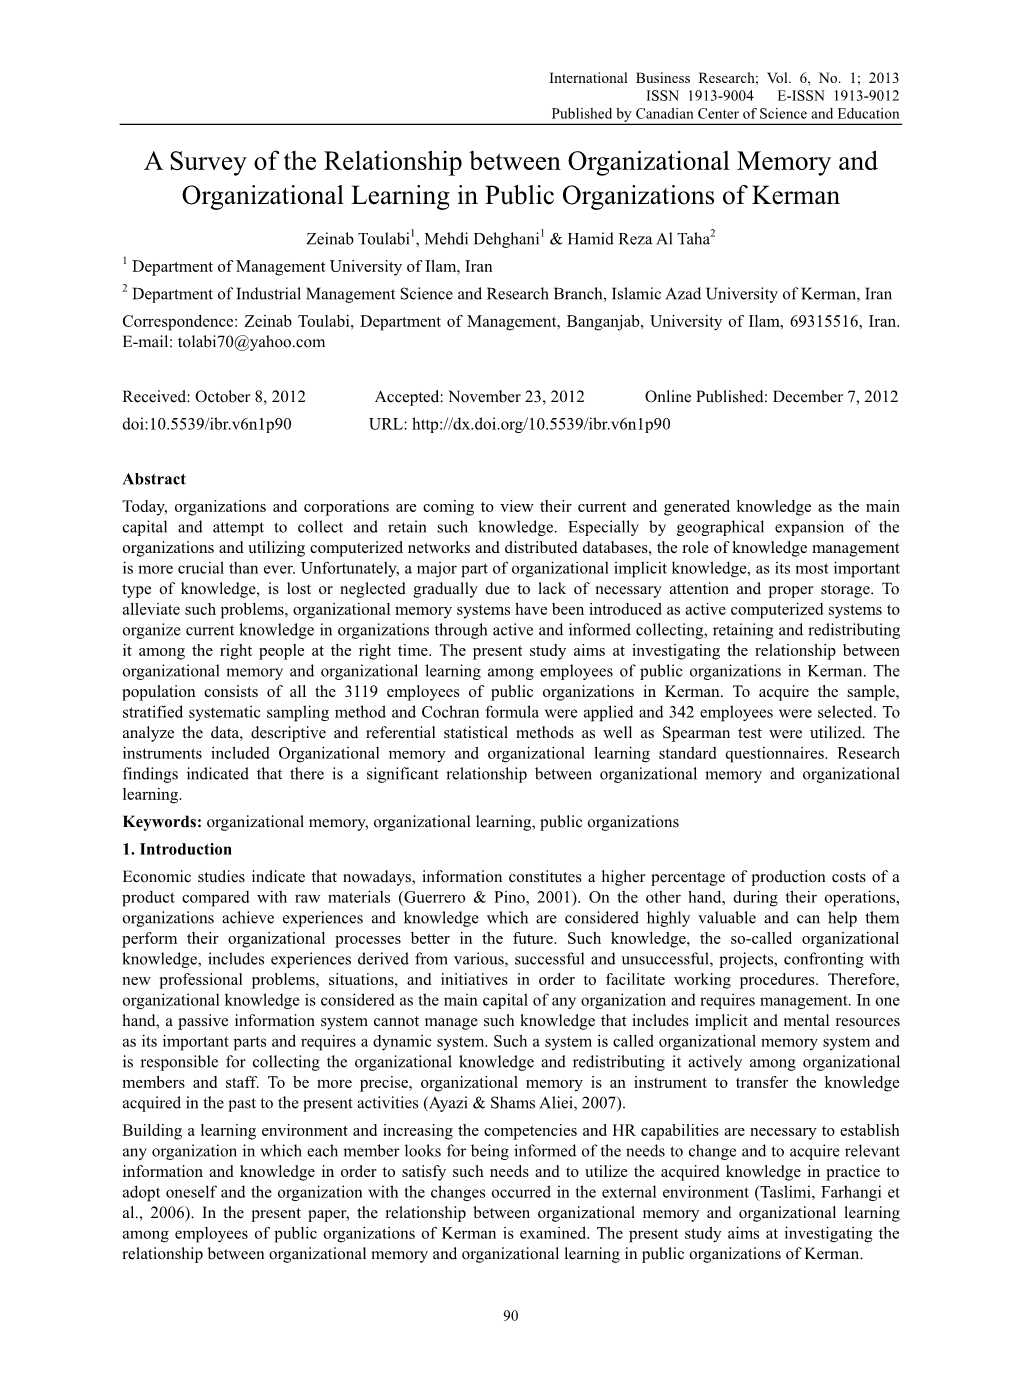 A Survey of the Relationship Between Organizational Memory and Organizational Learning in Public Organizations of Kerman